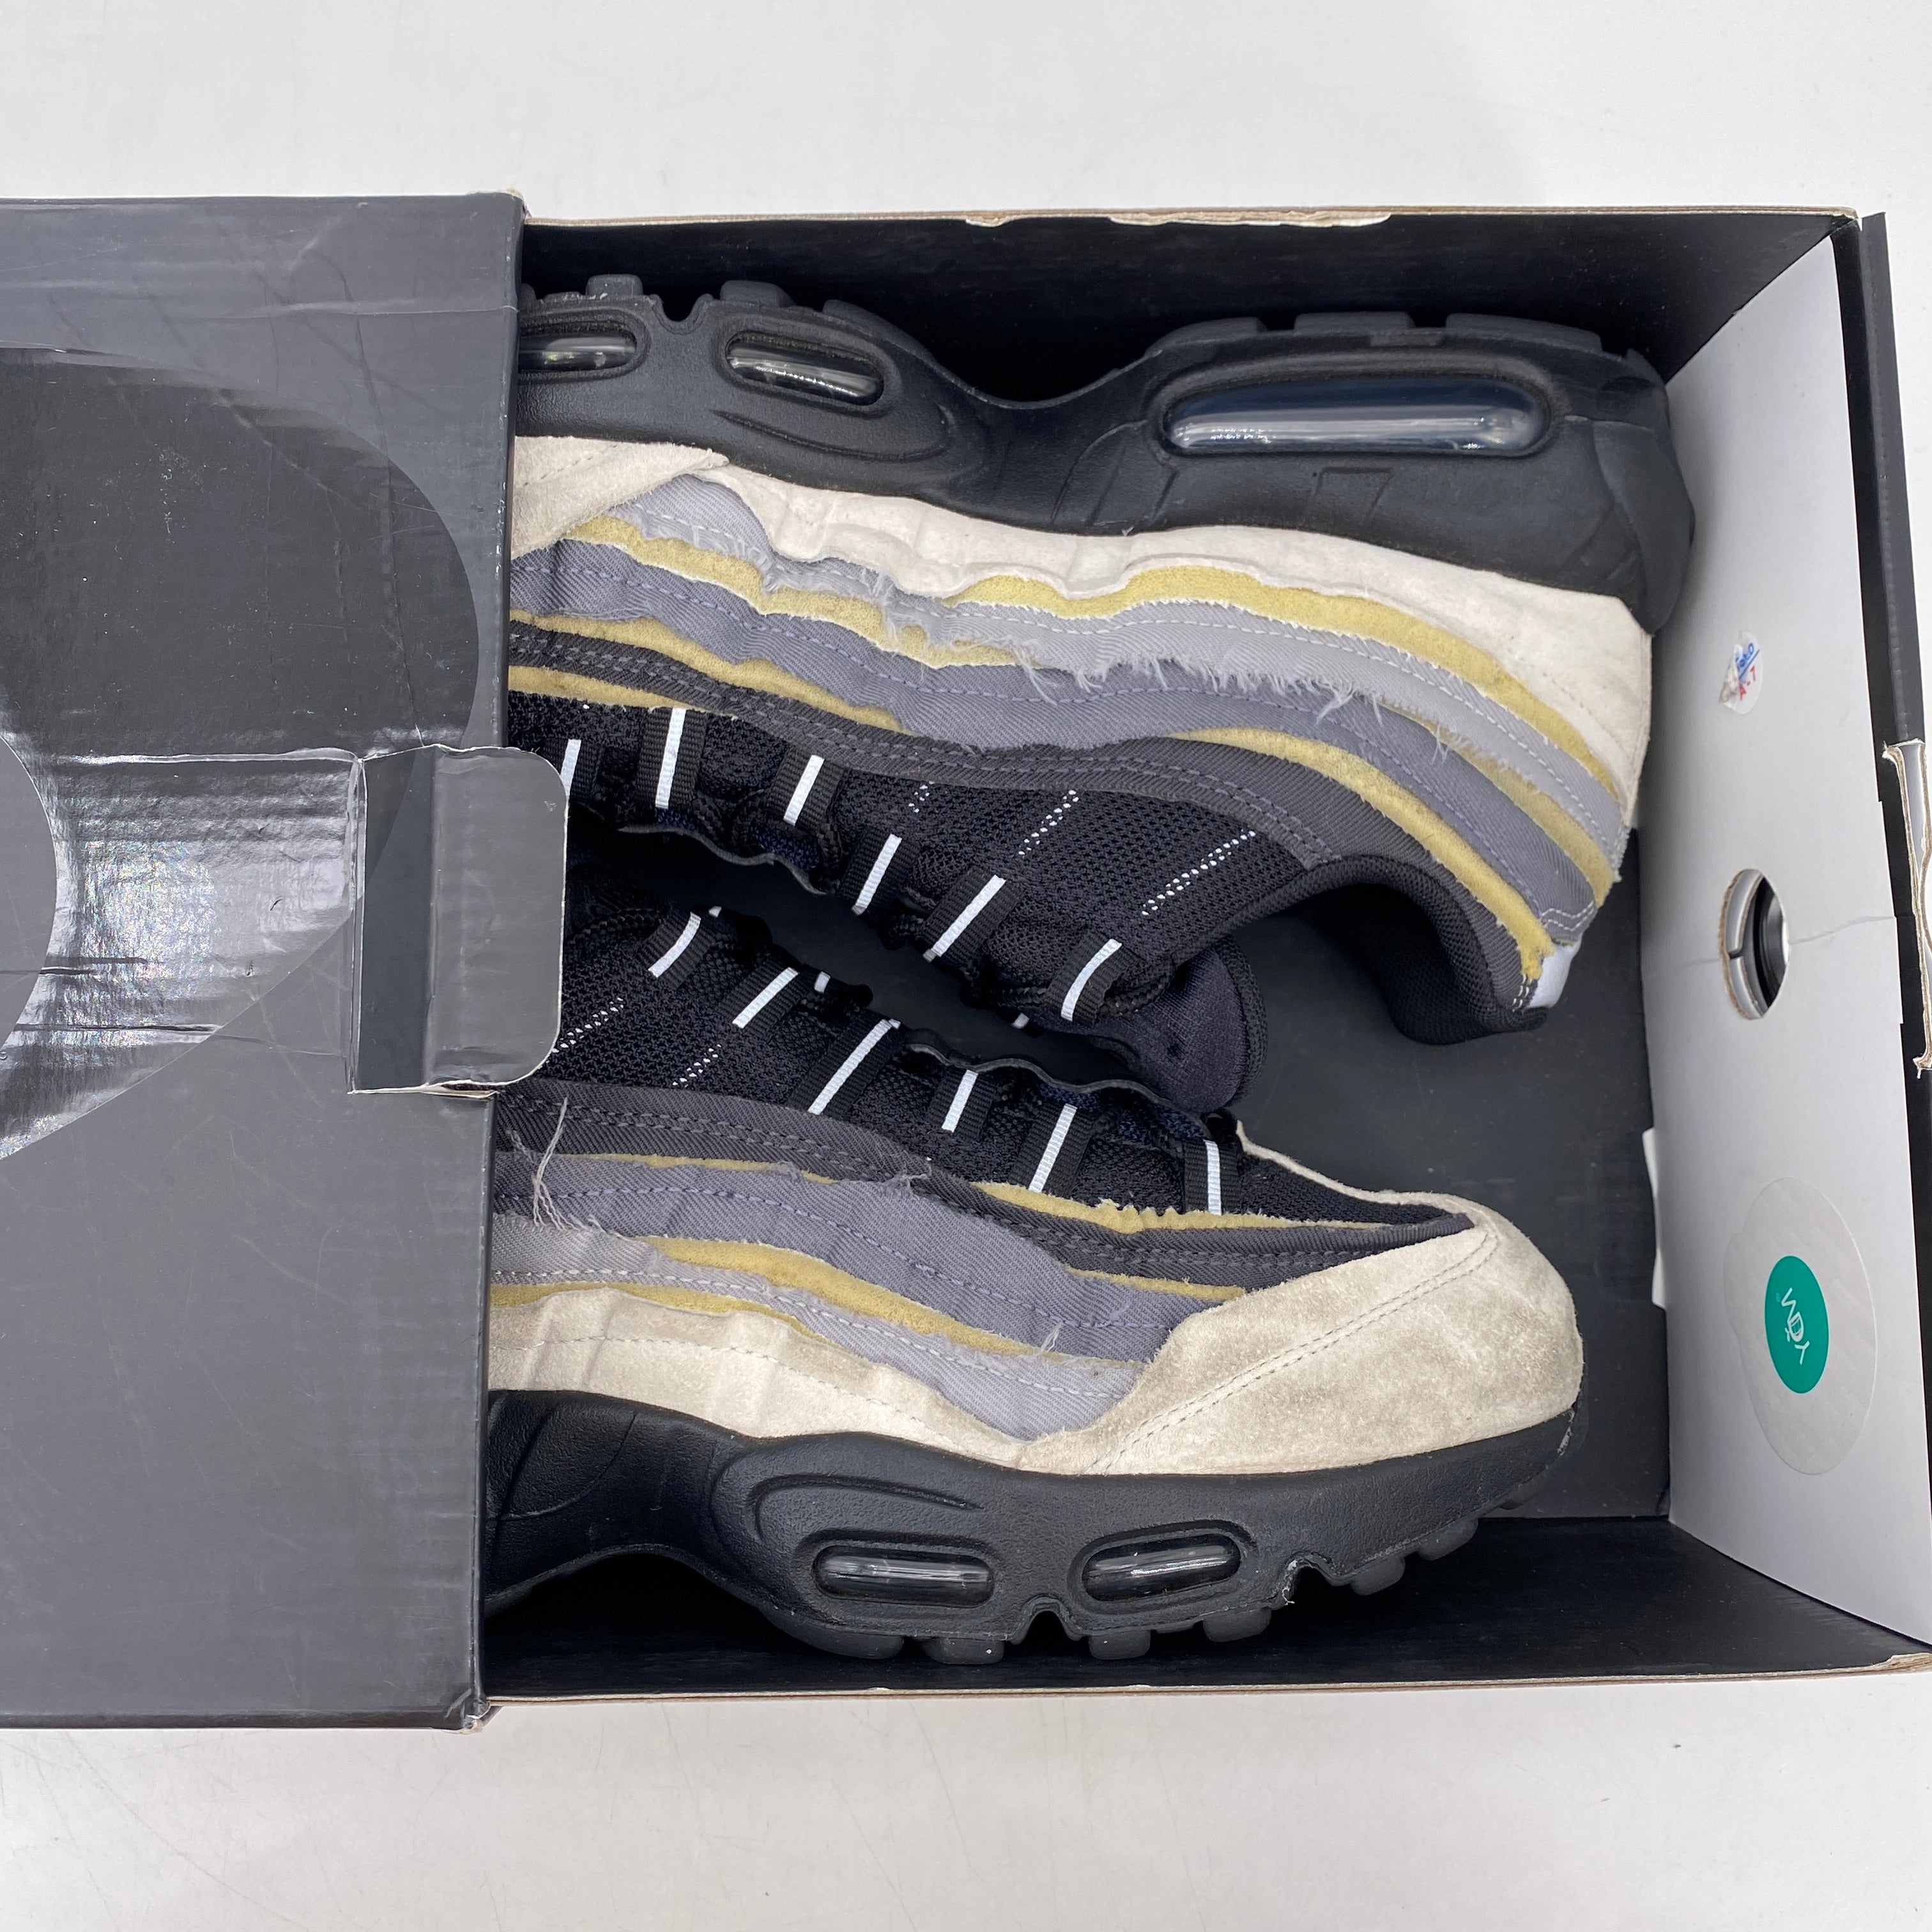 Nike Air Max 95 &quot;Cdg Black Grey&quot; 2020 Used Size 9